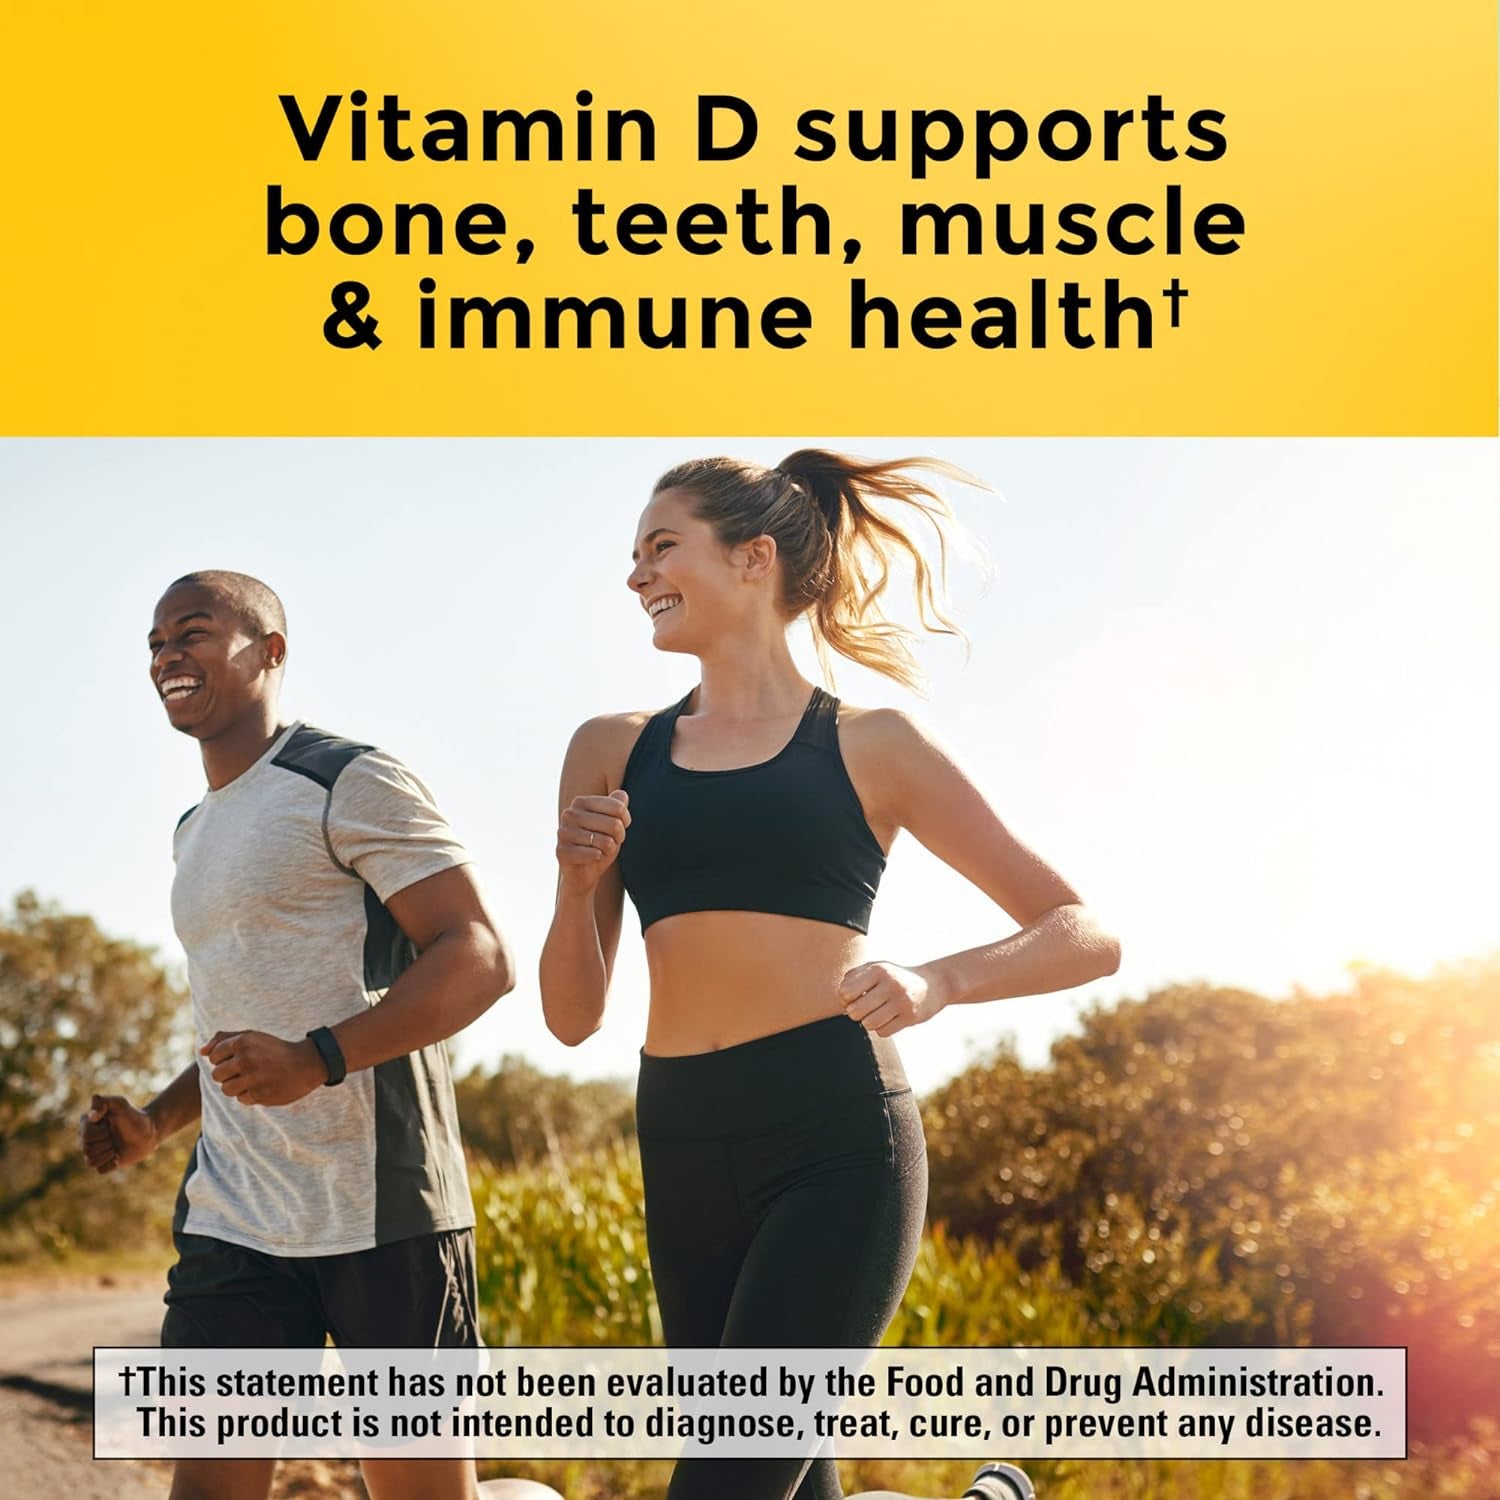 Extra Strength Vitamin D3 5000 IU (125 Mcg), Vitamin D Supplement for Bone, Teeth, Muscle, Immune Health Support, 70 Sugar Free Fast Dissolve Tablets, 70 Day Supply